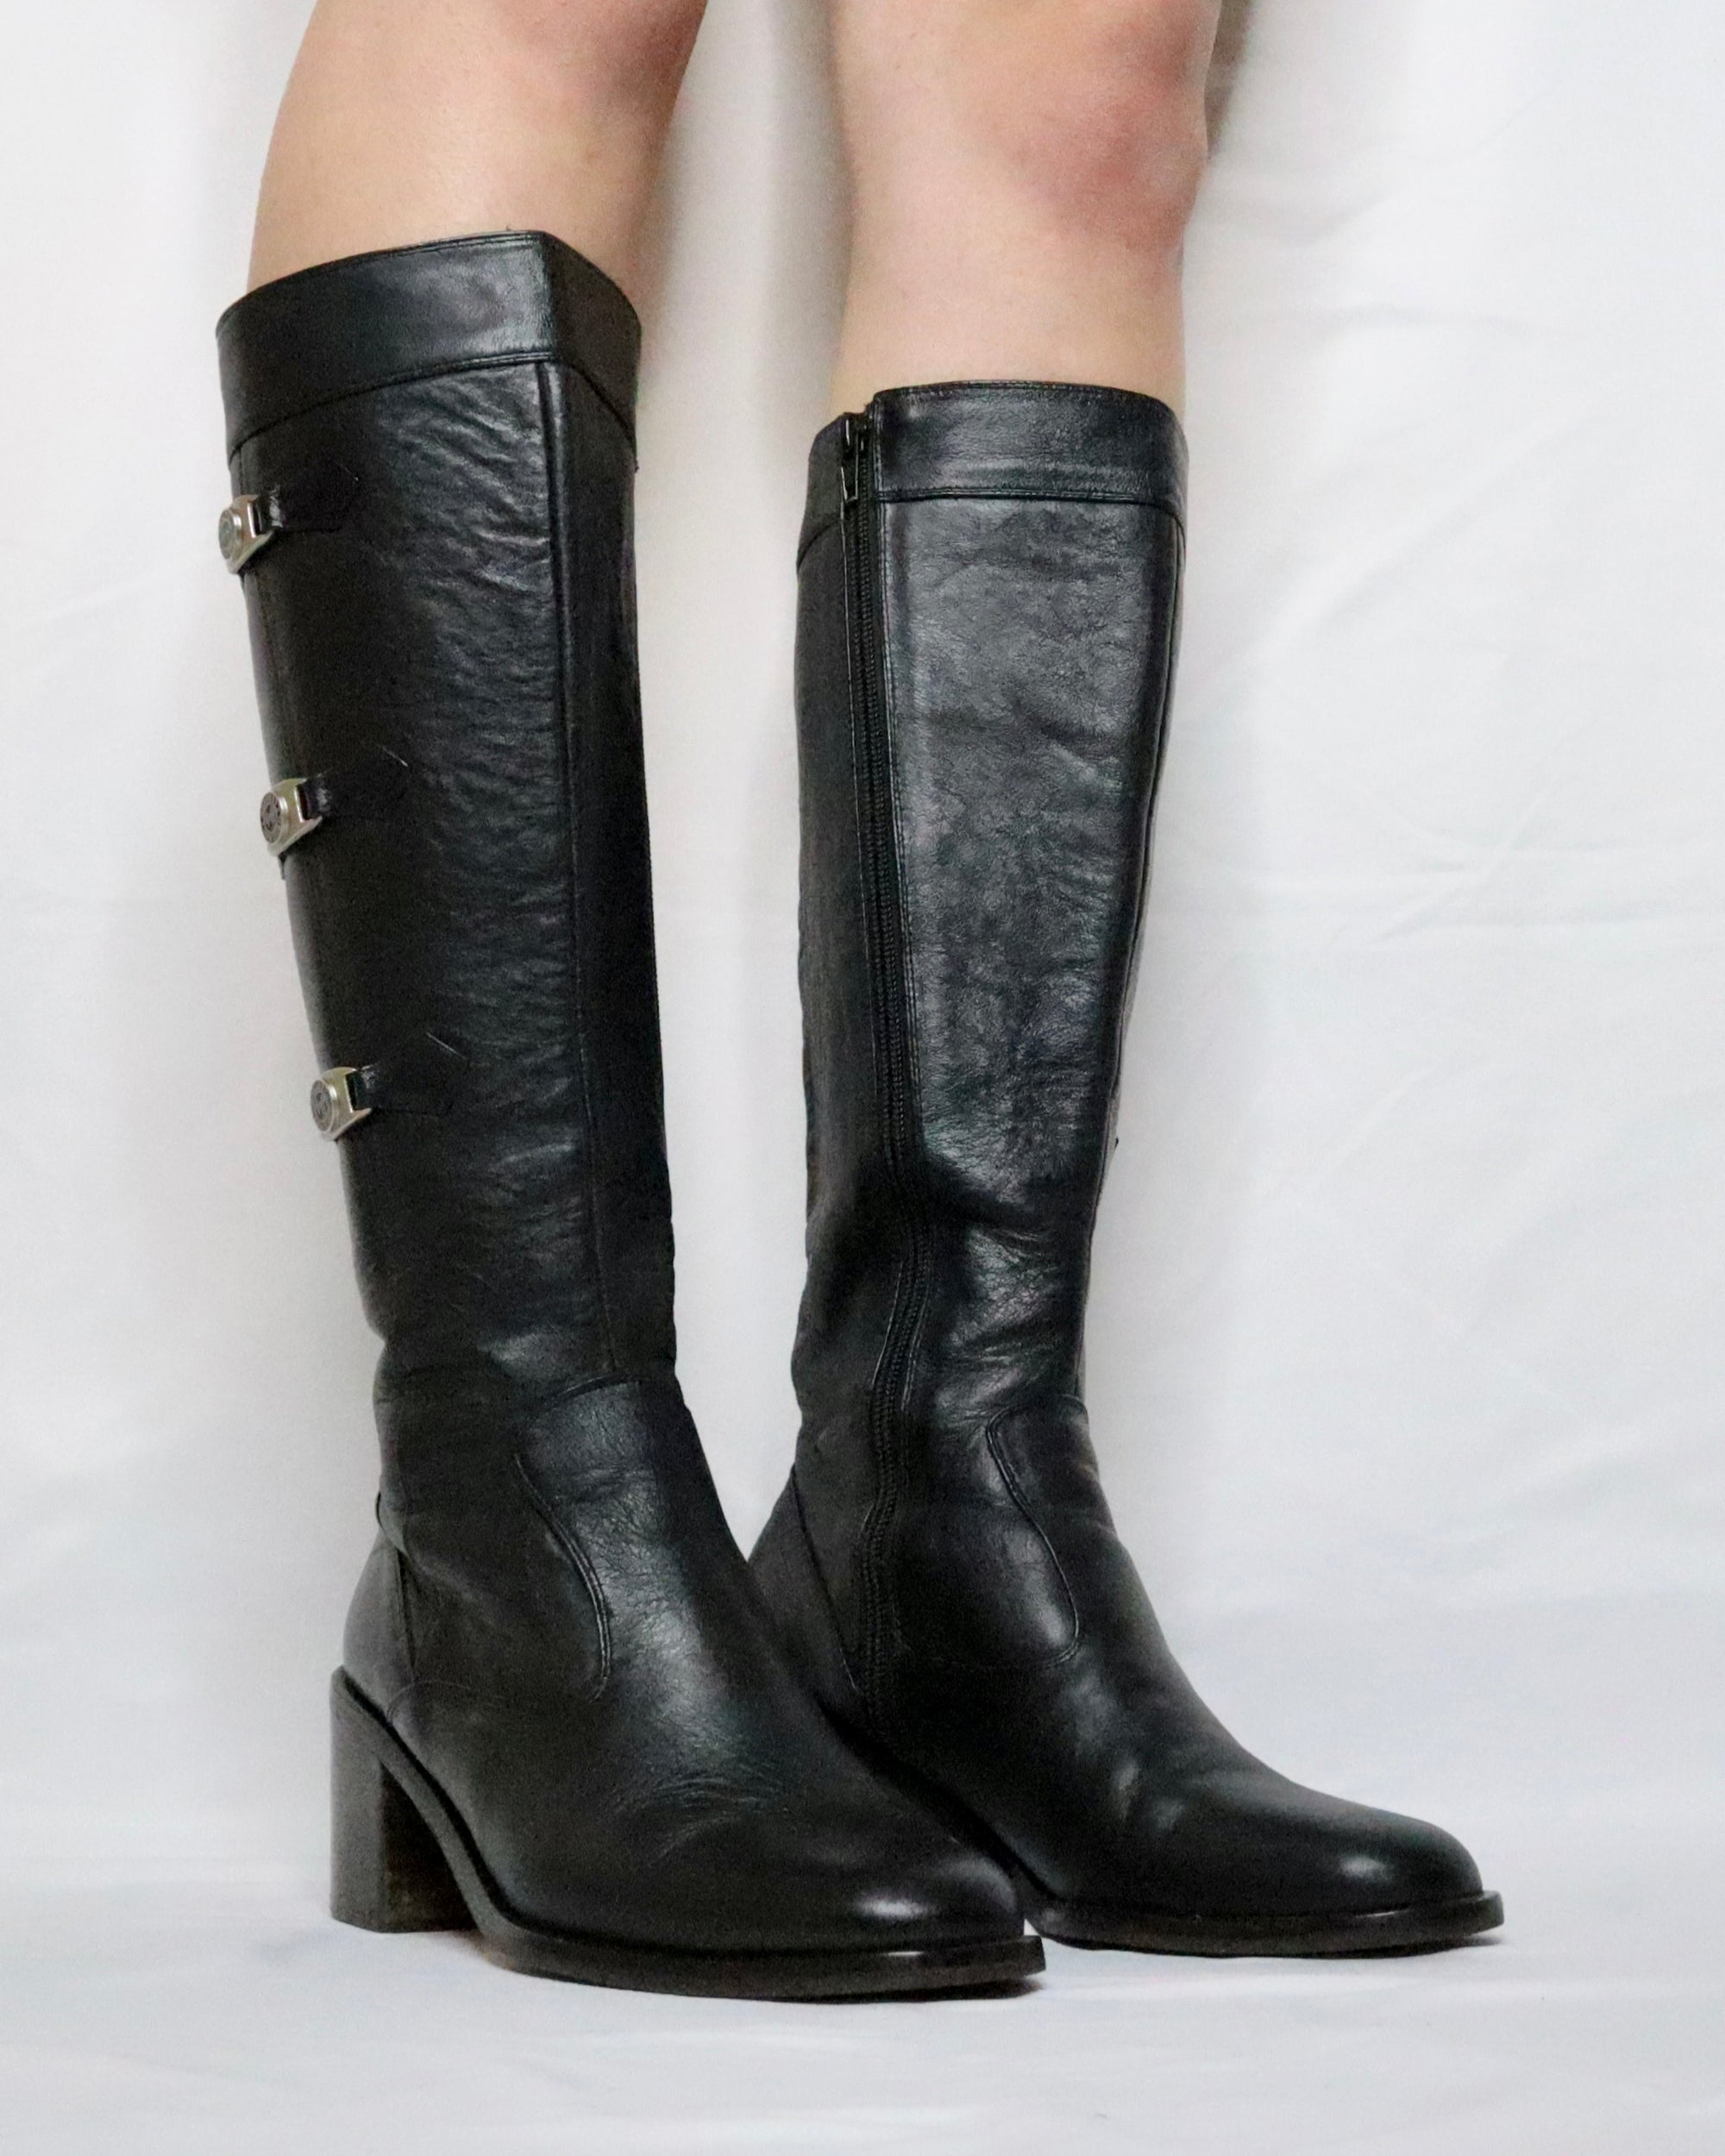 Knee High Black Leather Boots (7 US) 